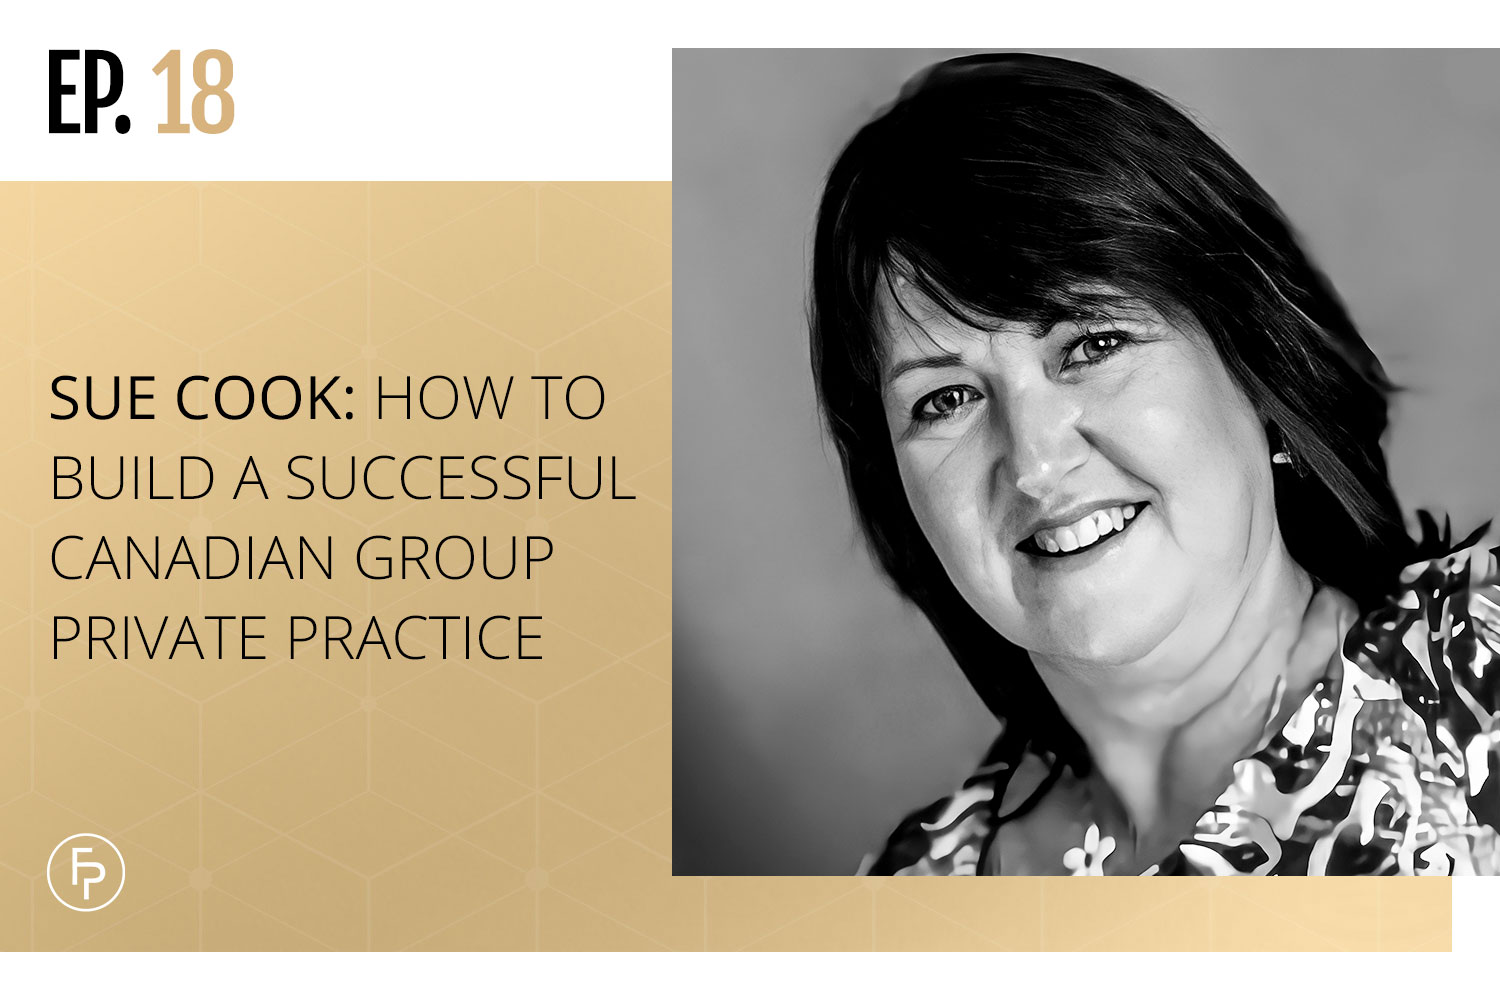  Sue Cook: How to Build a Successful Canadian Group Private Practice | EP 18